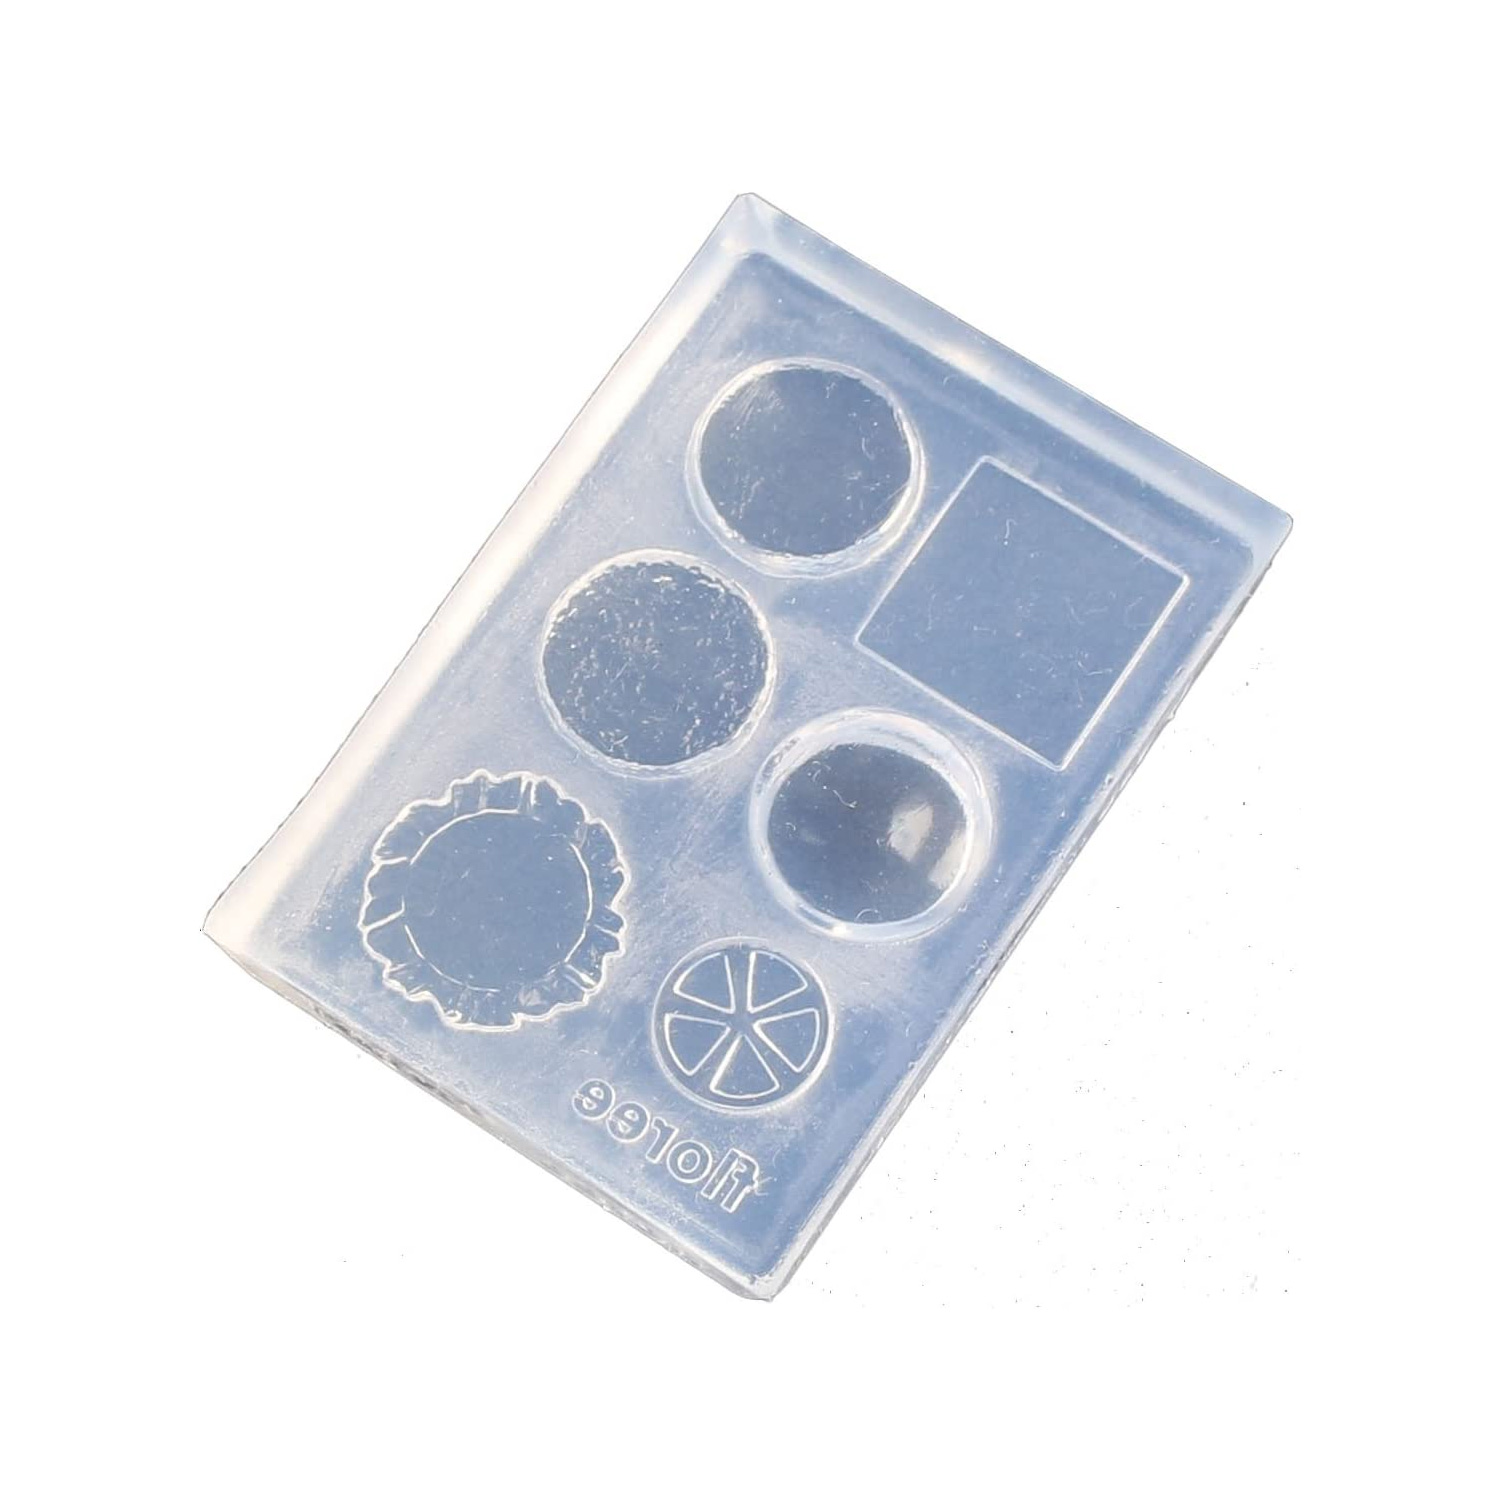 KAM-REJ-410 Resin Crafting Silicone Mold (pcs)